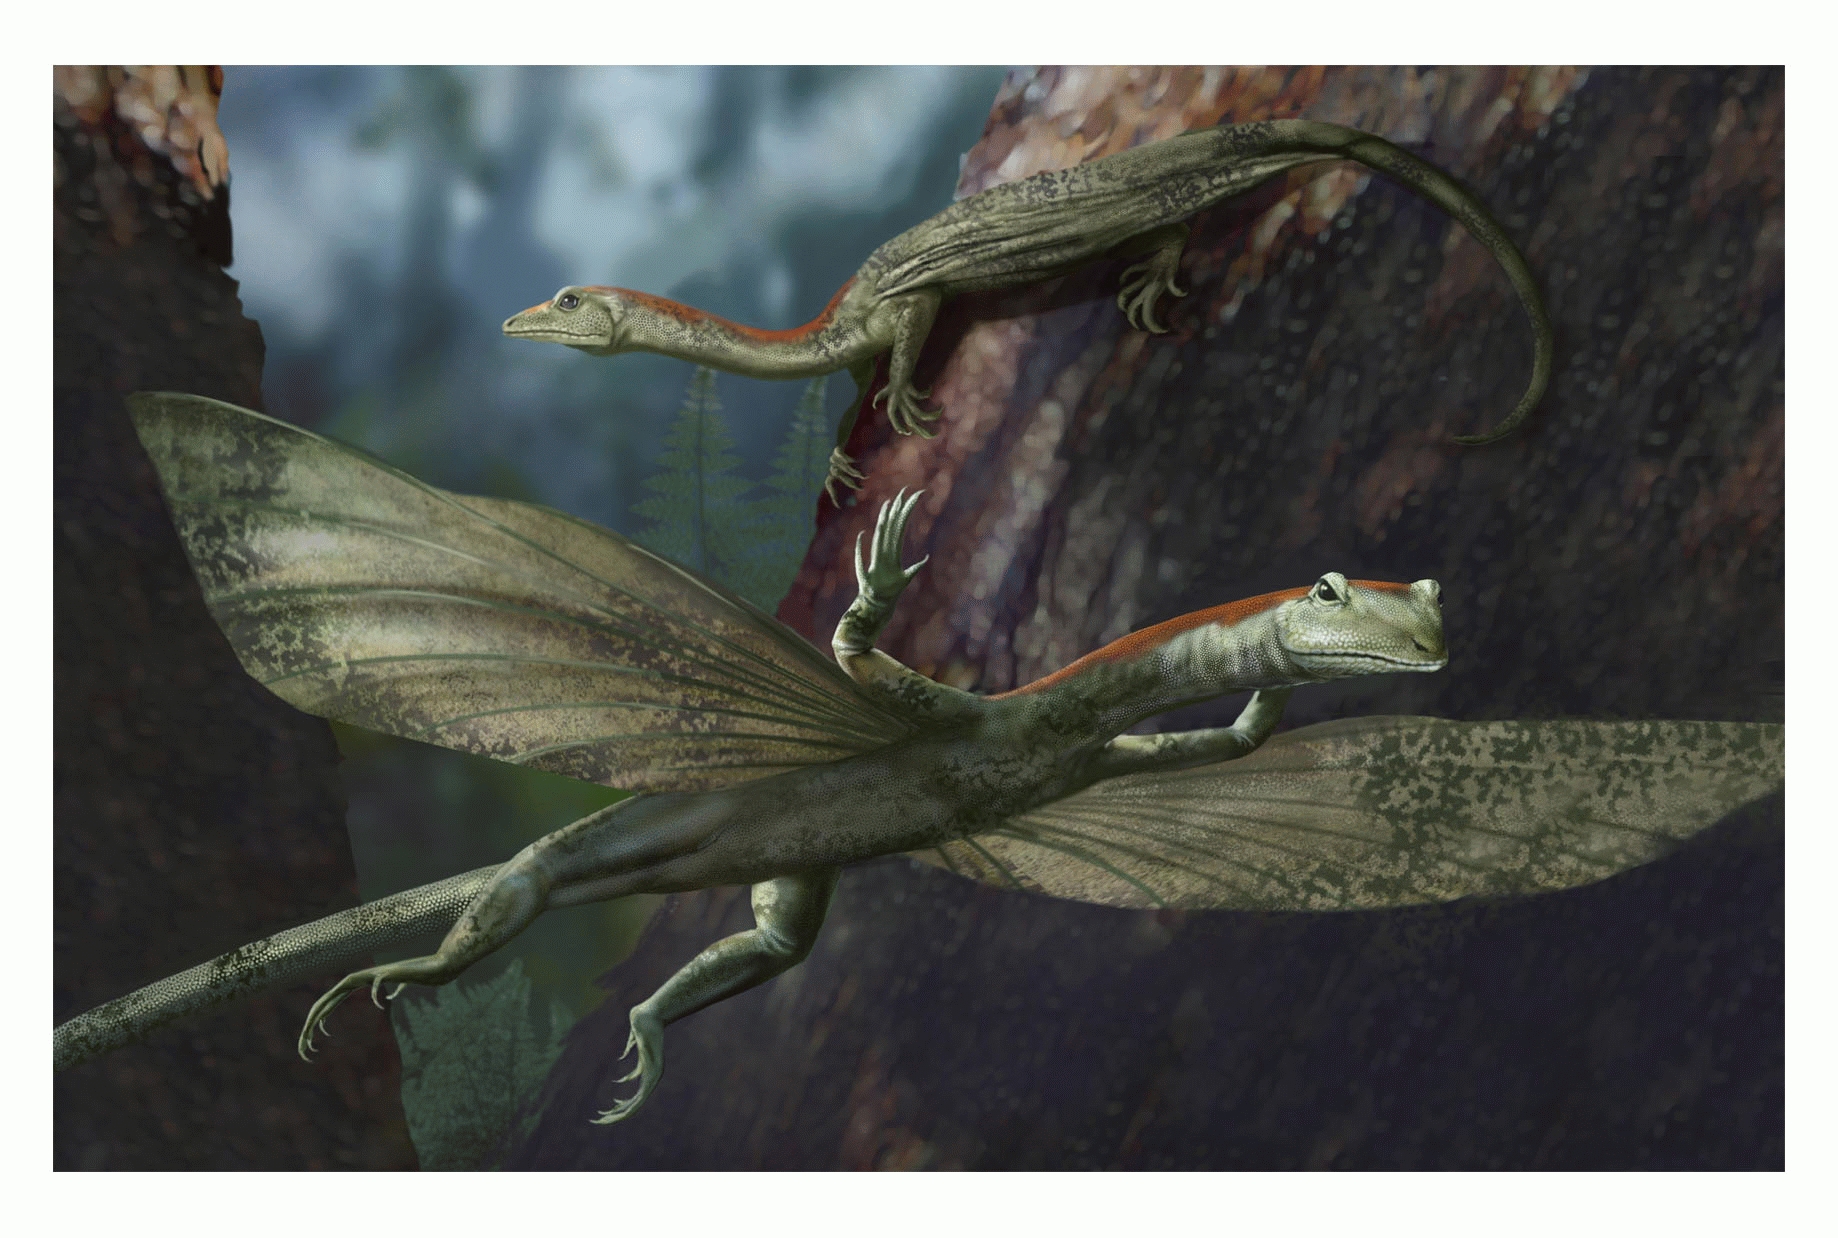 Ancient Long-necked Gliding Reptile Discovered